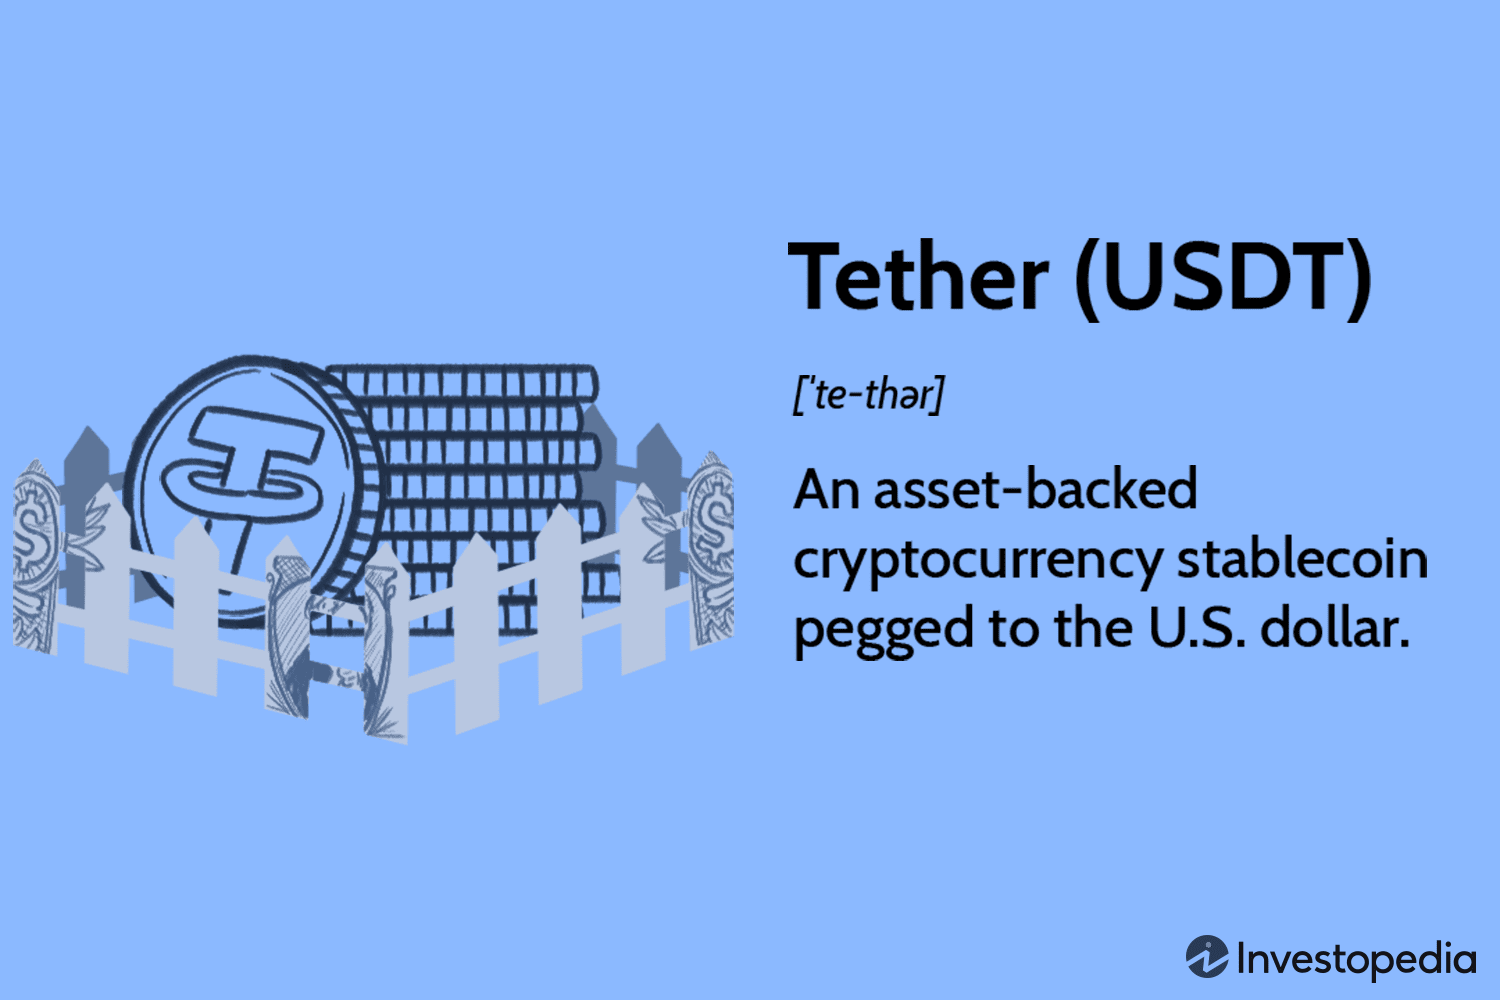 Why Do People Use Tether Instead of Usd?